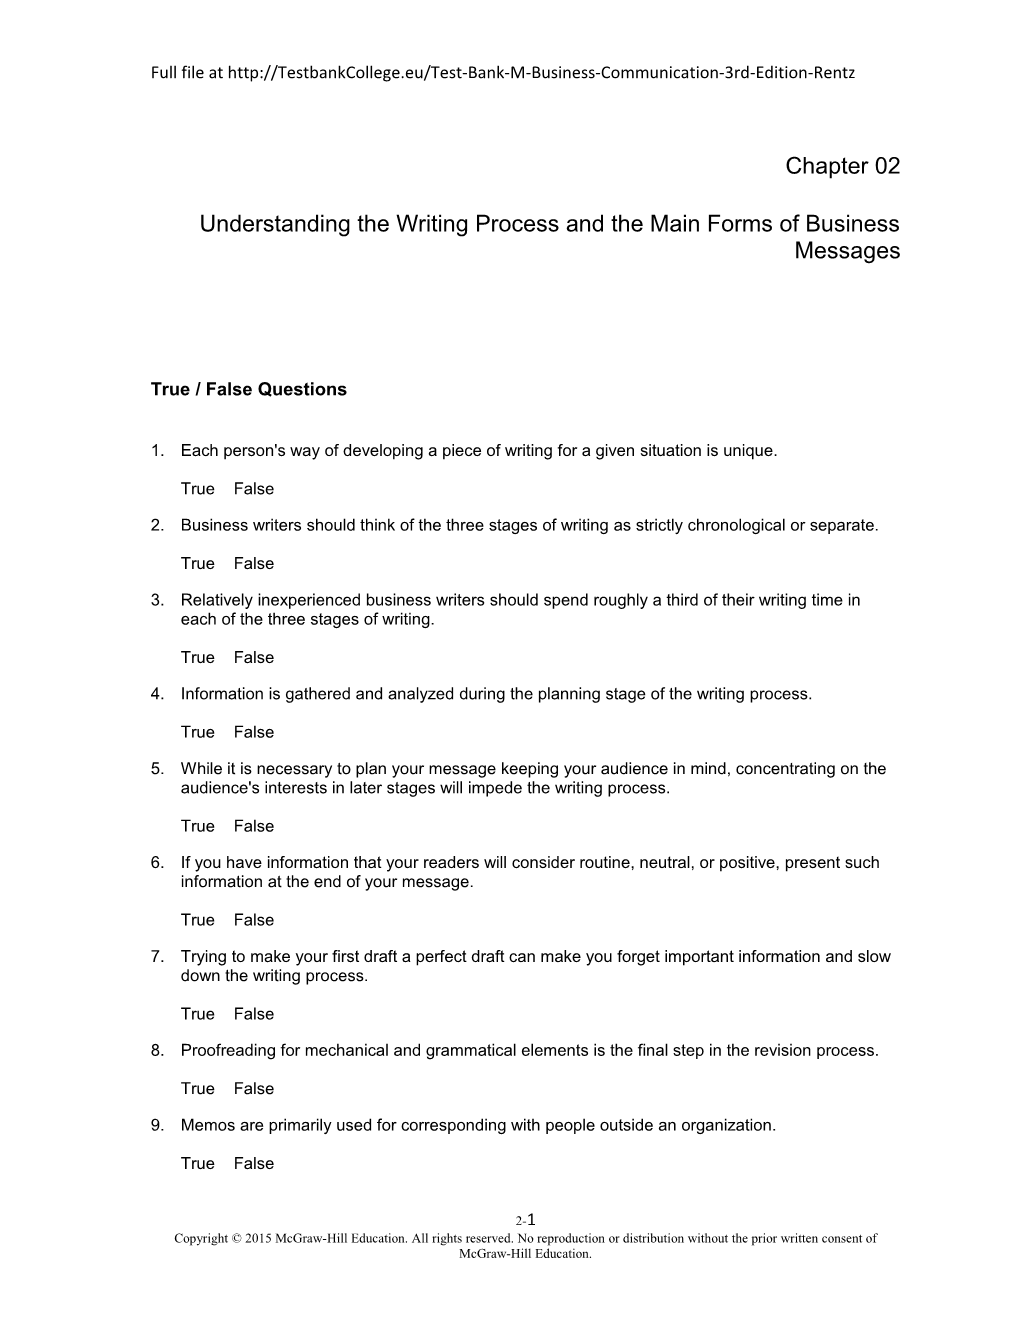 Understanding the Writing Process and the Main Forms of Business Messages